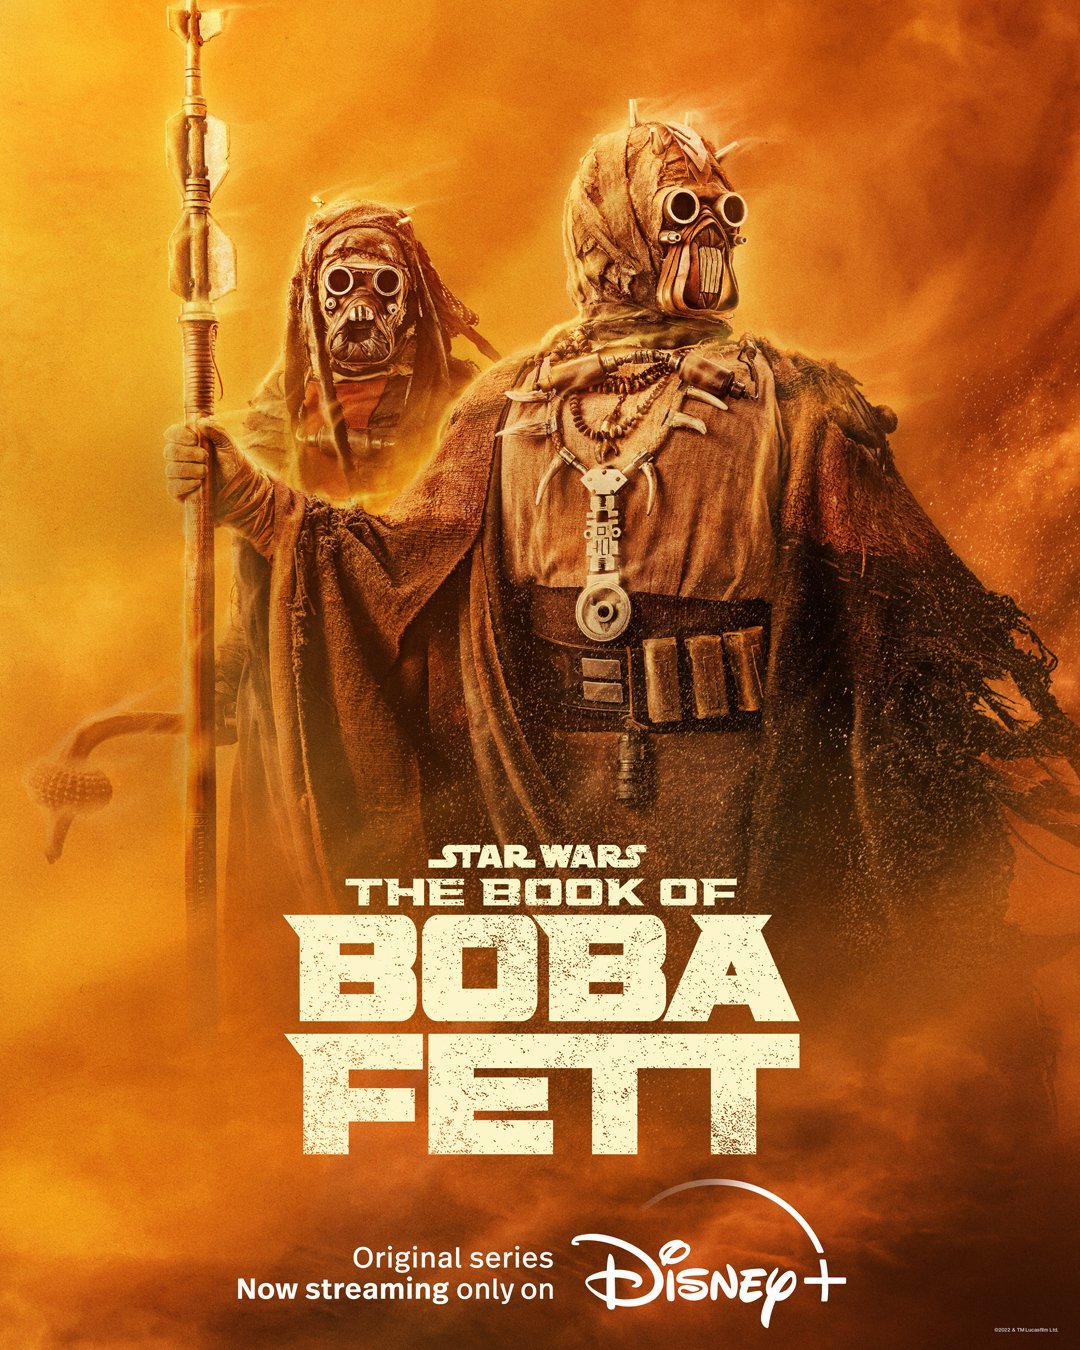 The Book of Boba Fett Tusken Raiders Character Poster